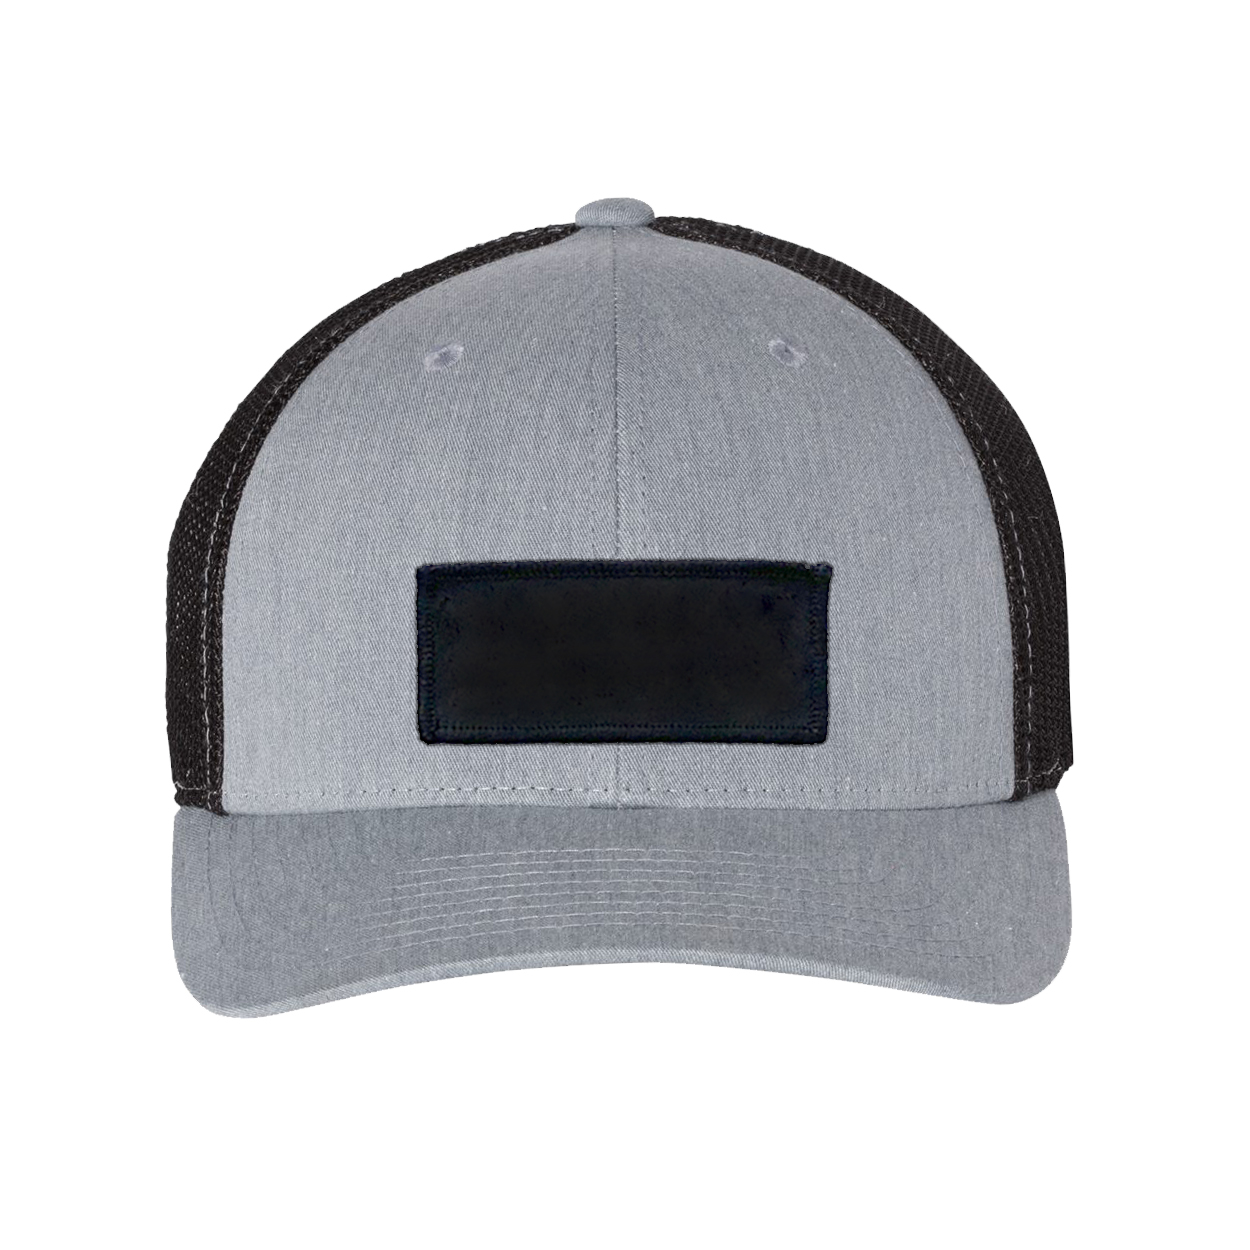 Product Details: Classic Woven Patch Snapback Trucker Hat Heather Gray/Black (BW 6 PANEL SNAPBACK MESH 5216)